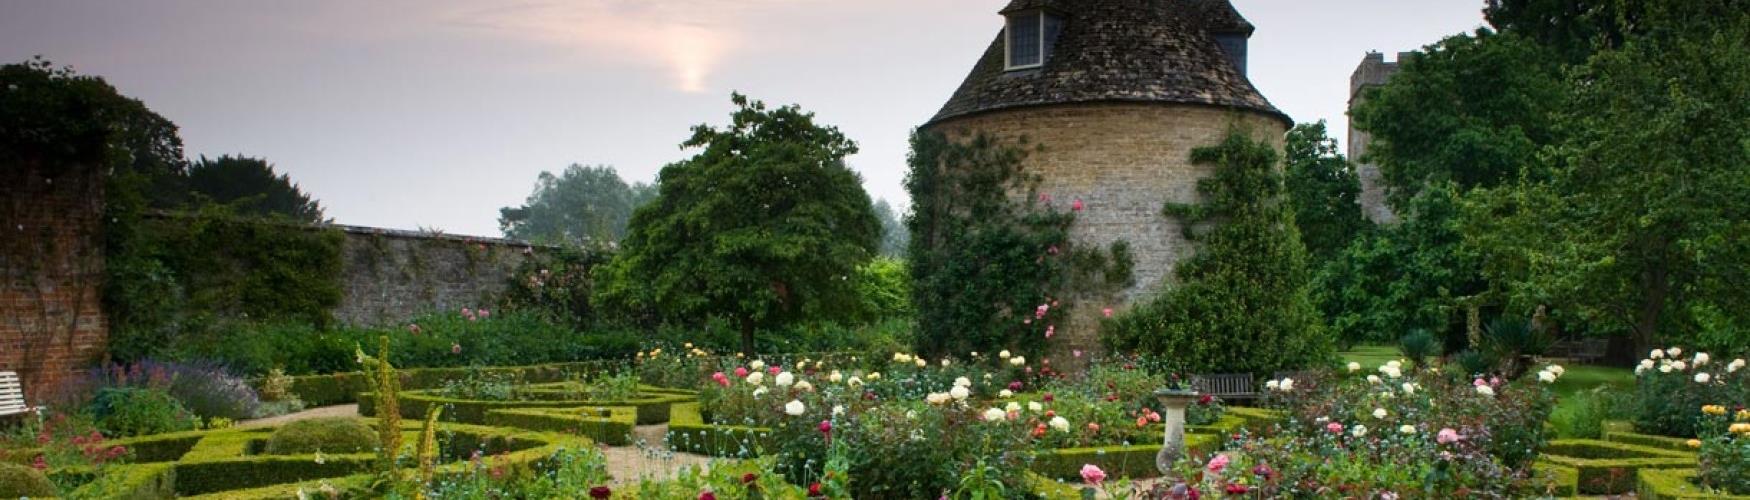 The dovecote surrounded by roses at Rousham (photo Harpur Garden Images)